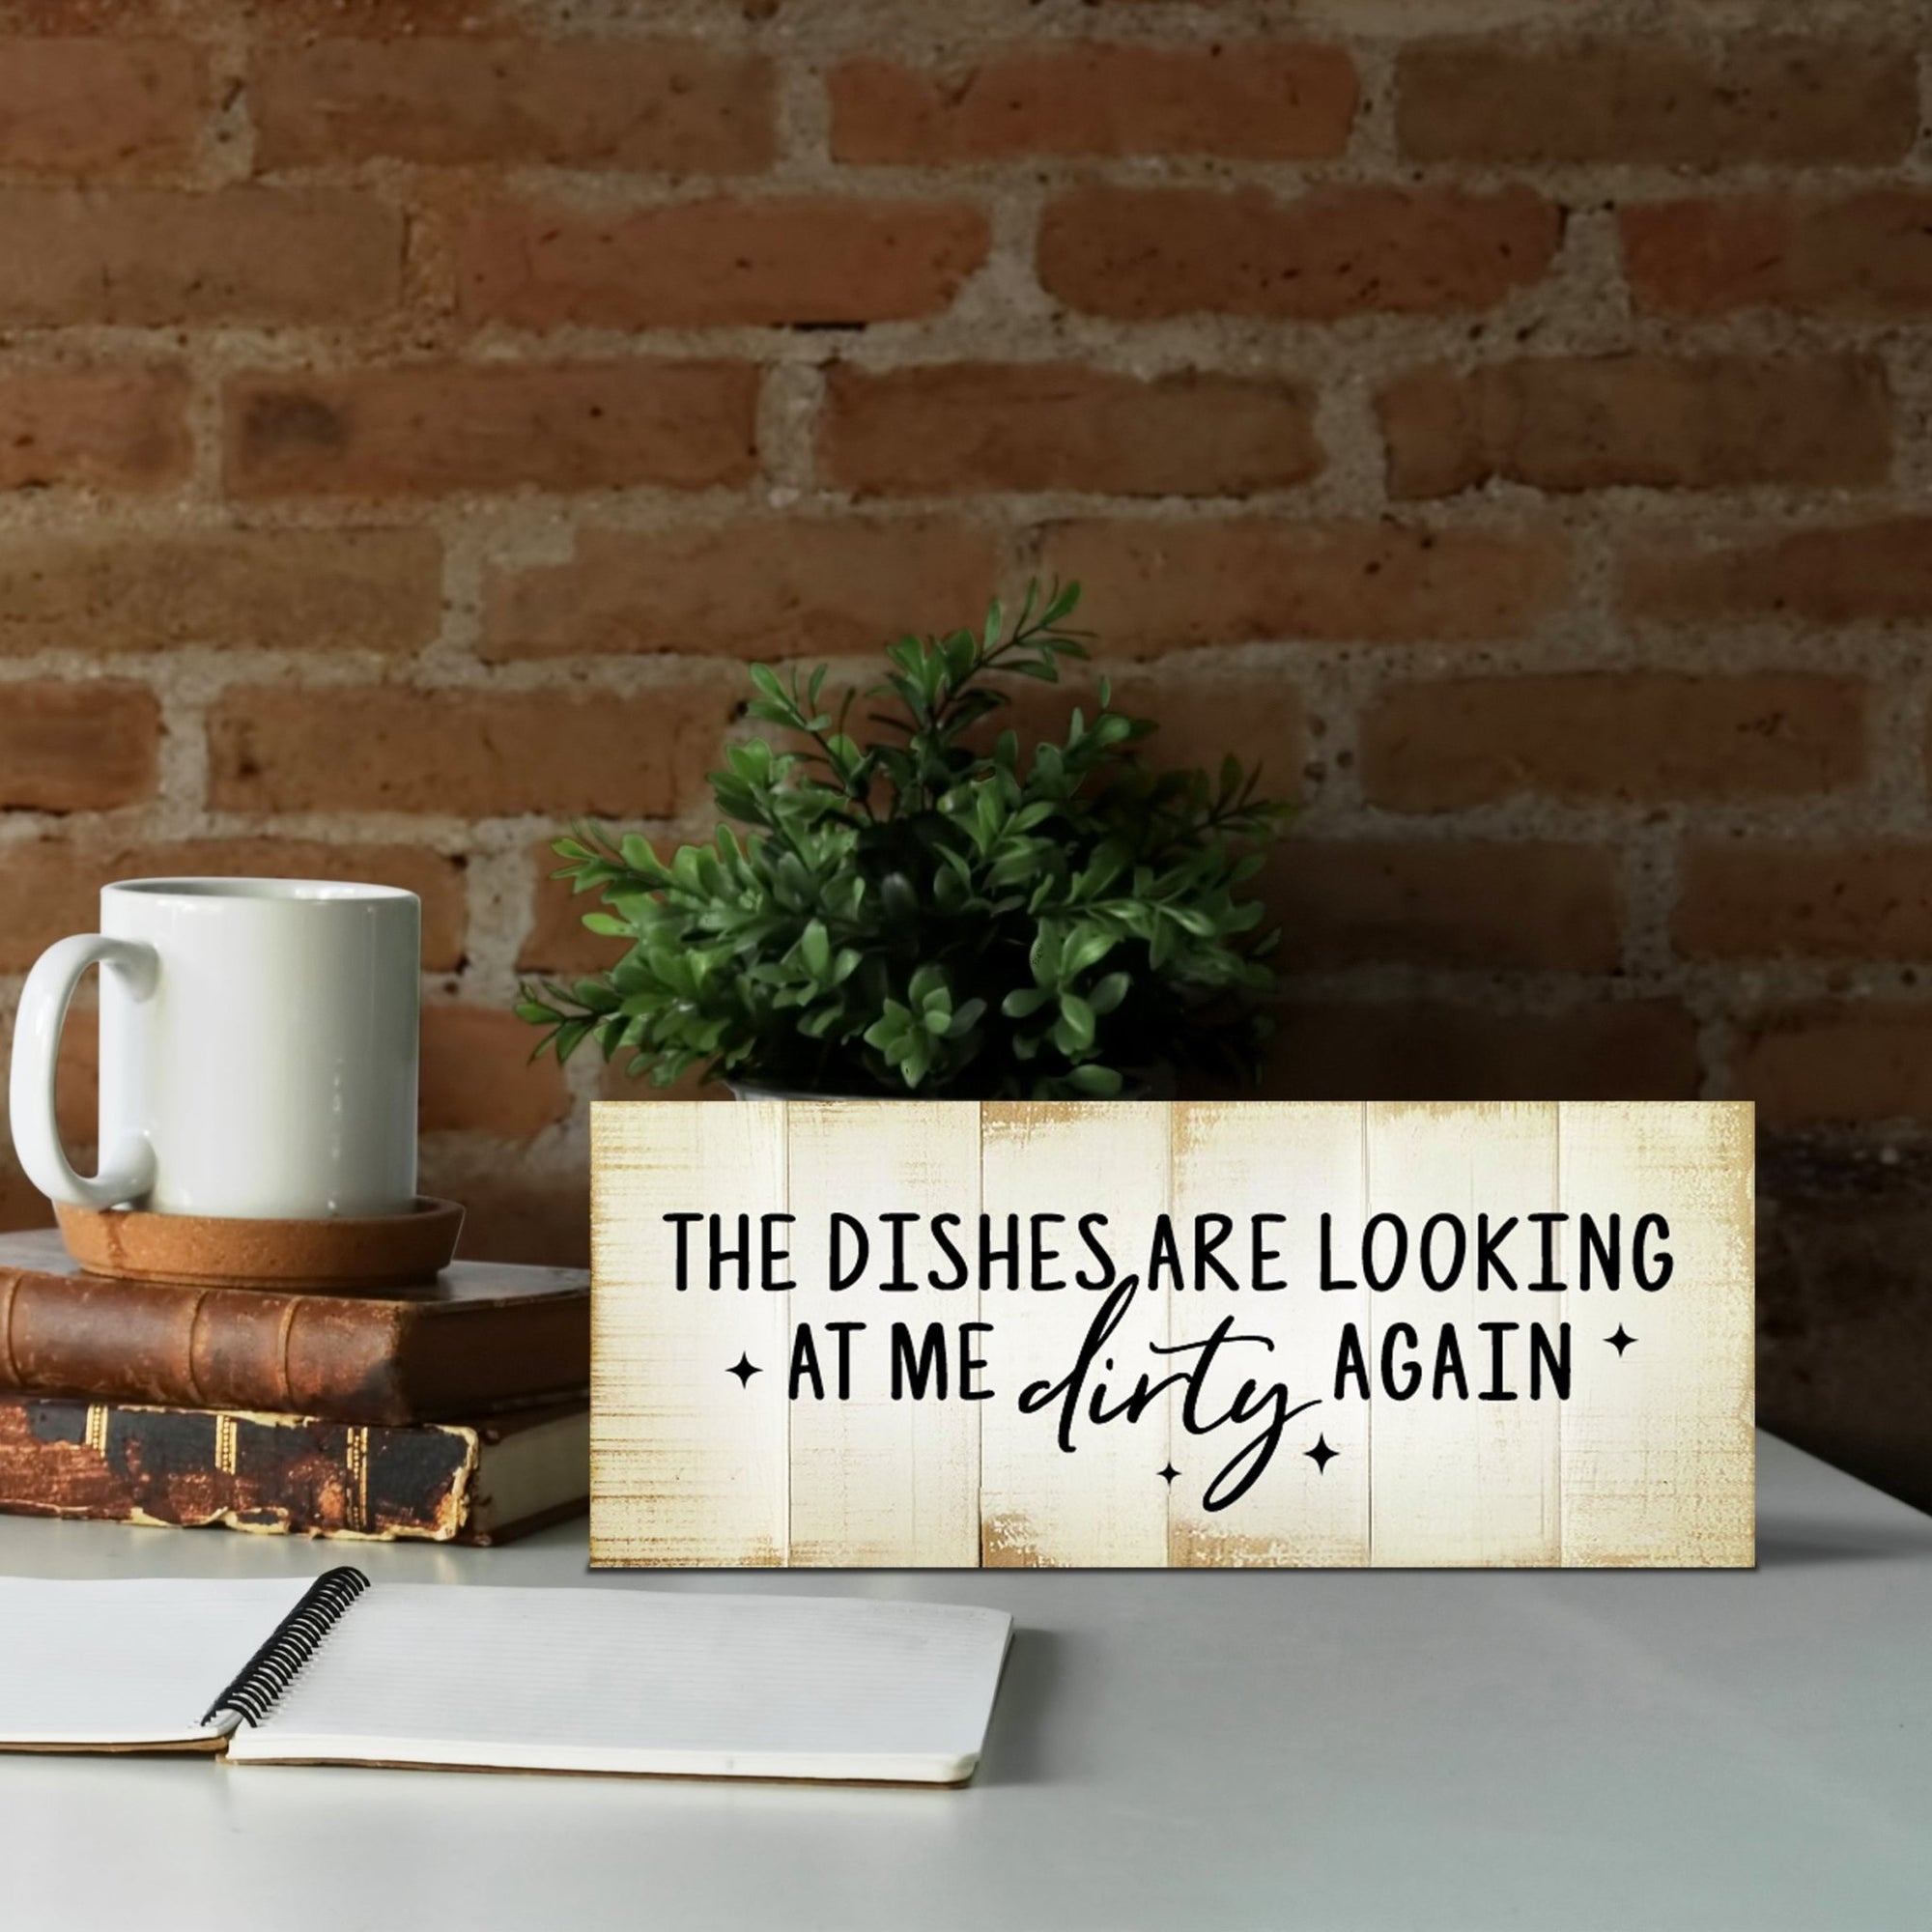 Inspirational Wooden Wall Hanging Plaque Kitchen Home Décor For All Season Decoration The Dishes Are Looking - LifeSong Milestones